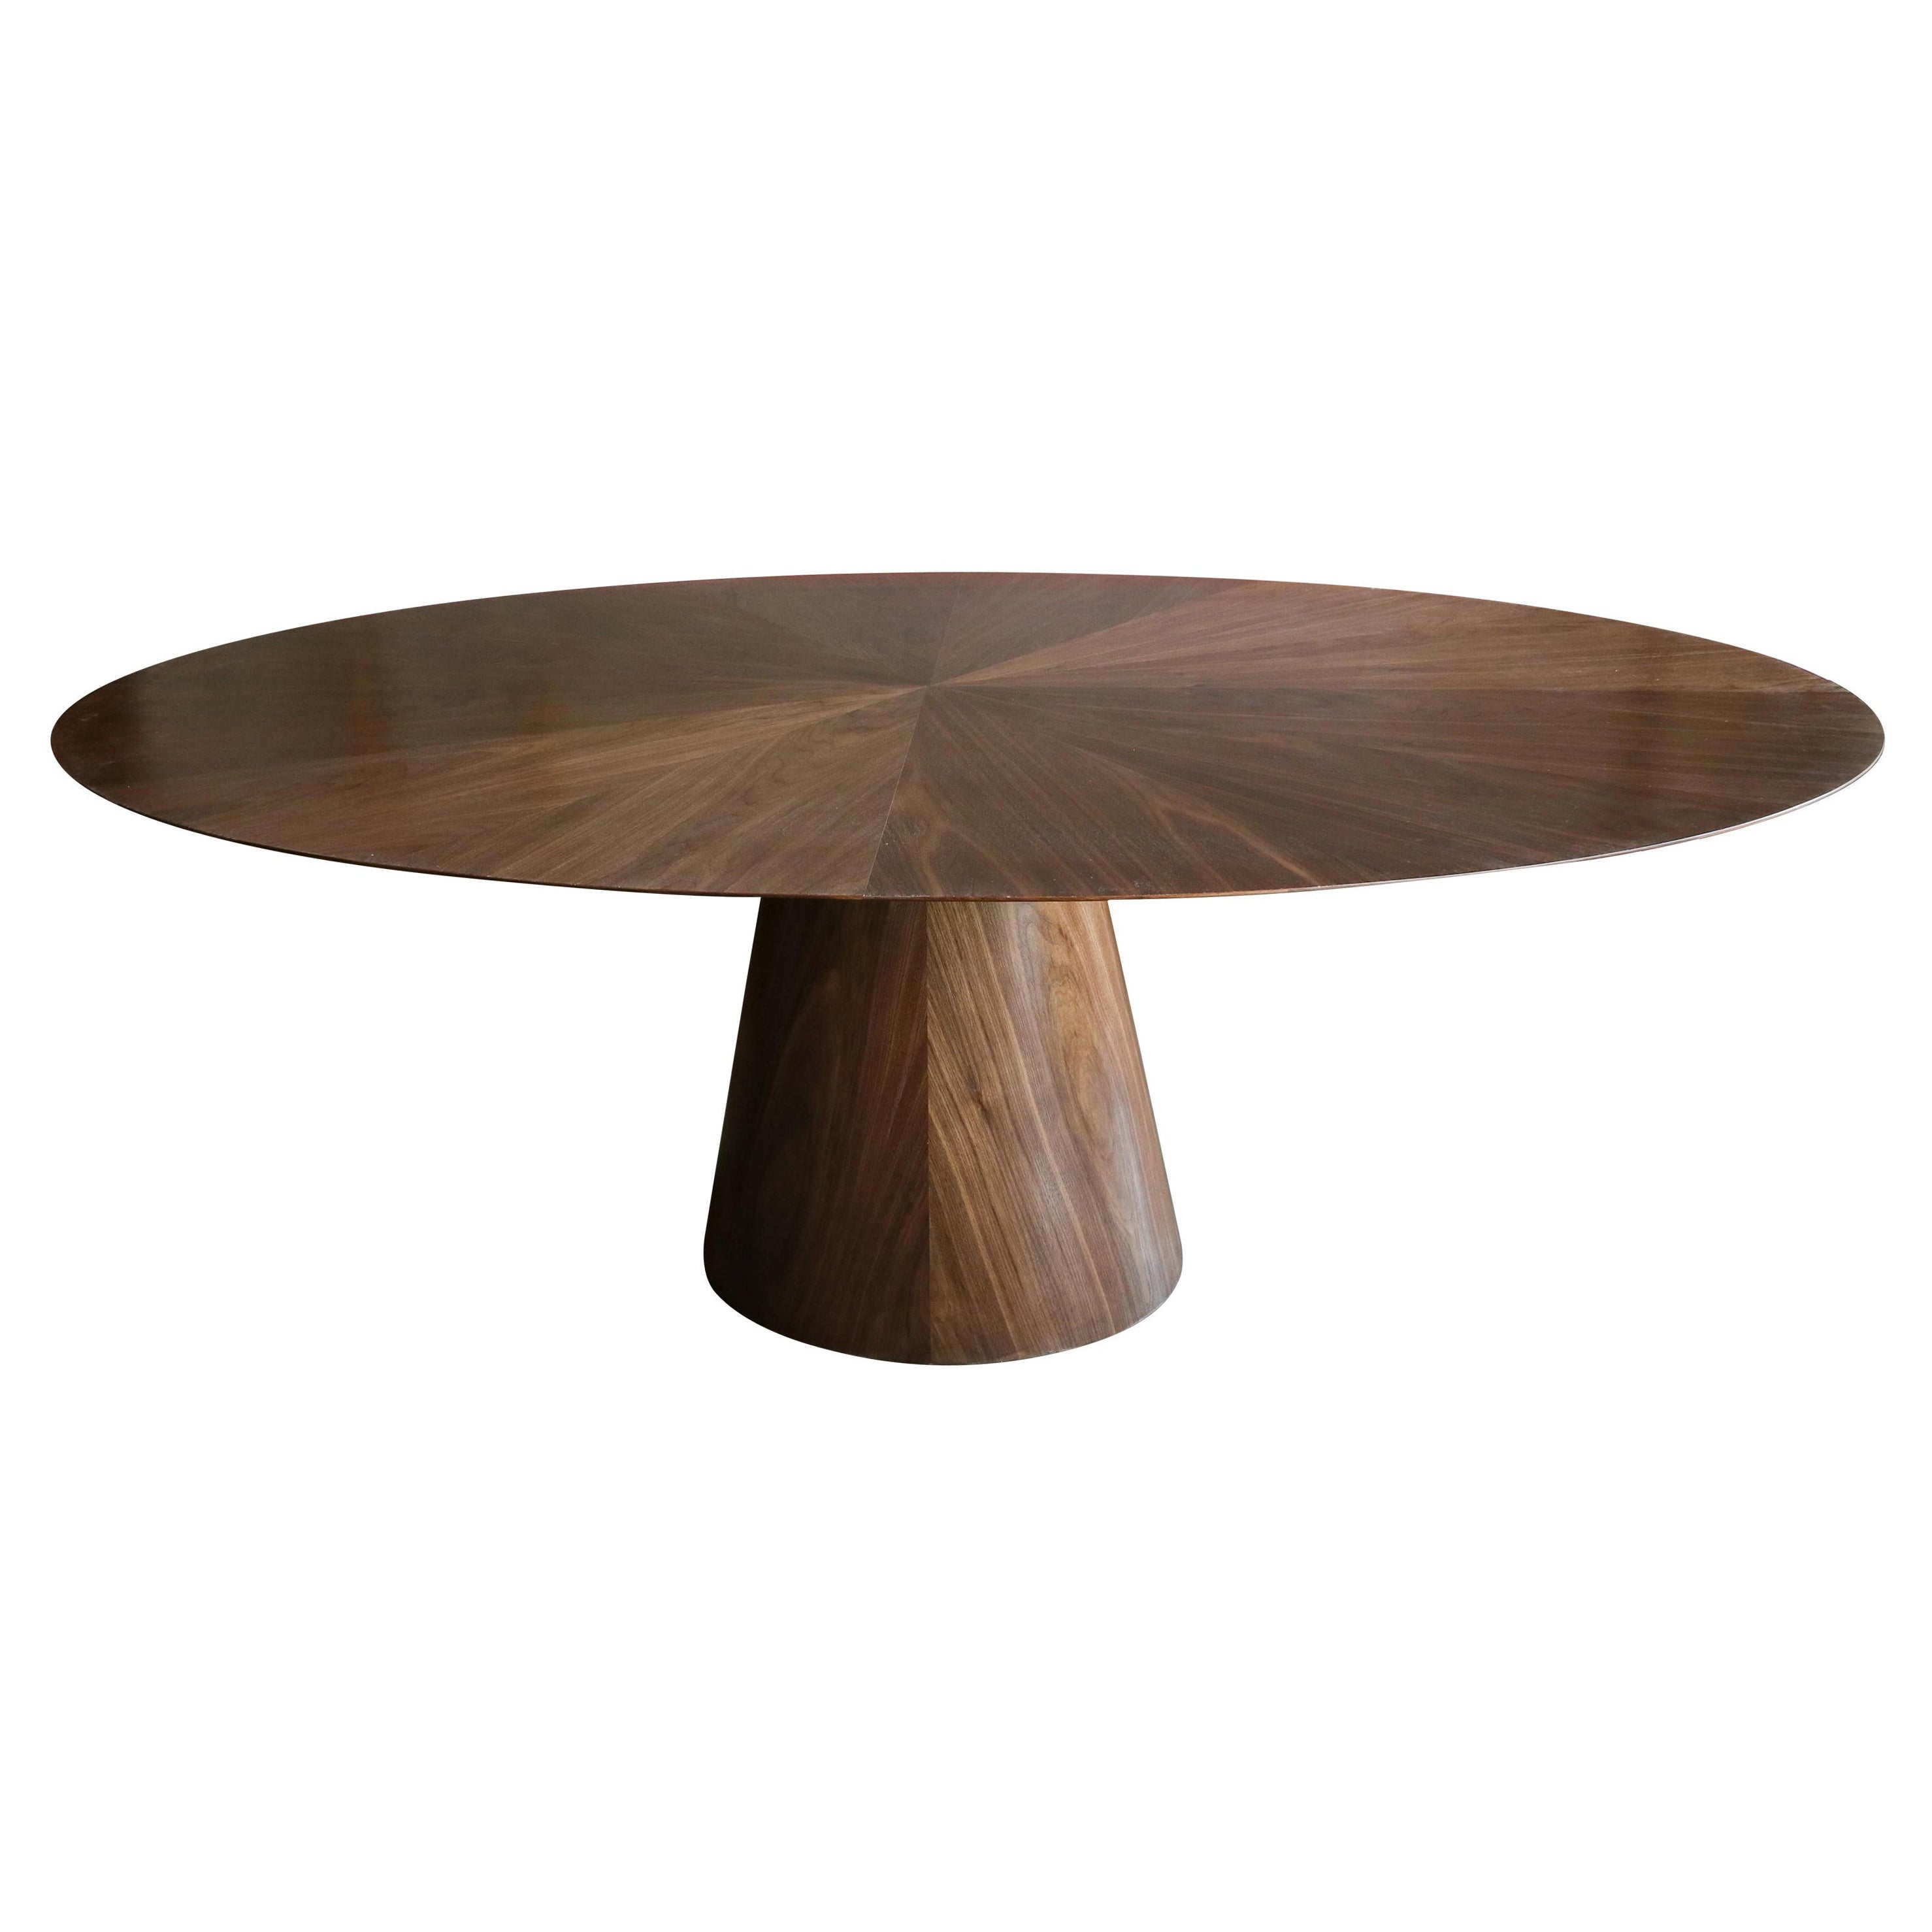 Custom Midcentury Style Walnut Oval Dining Table with Pedestal Base by Adesso For Sale